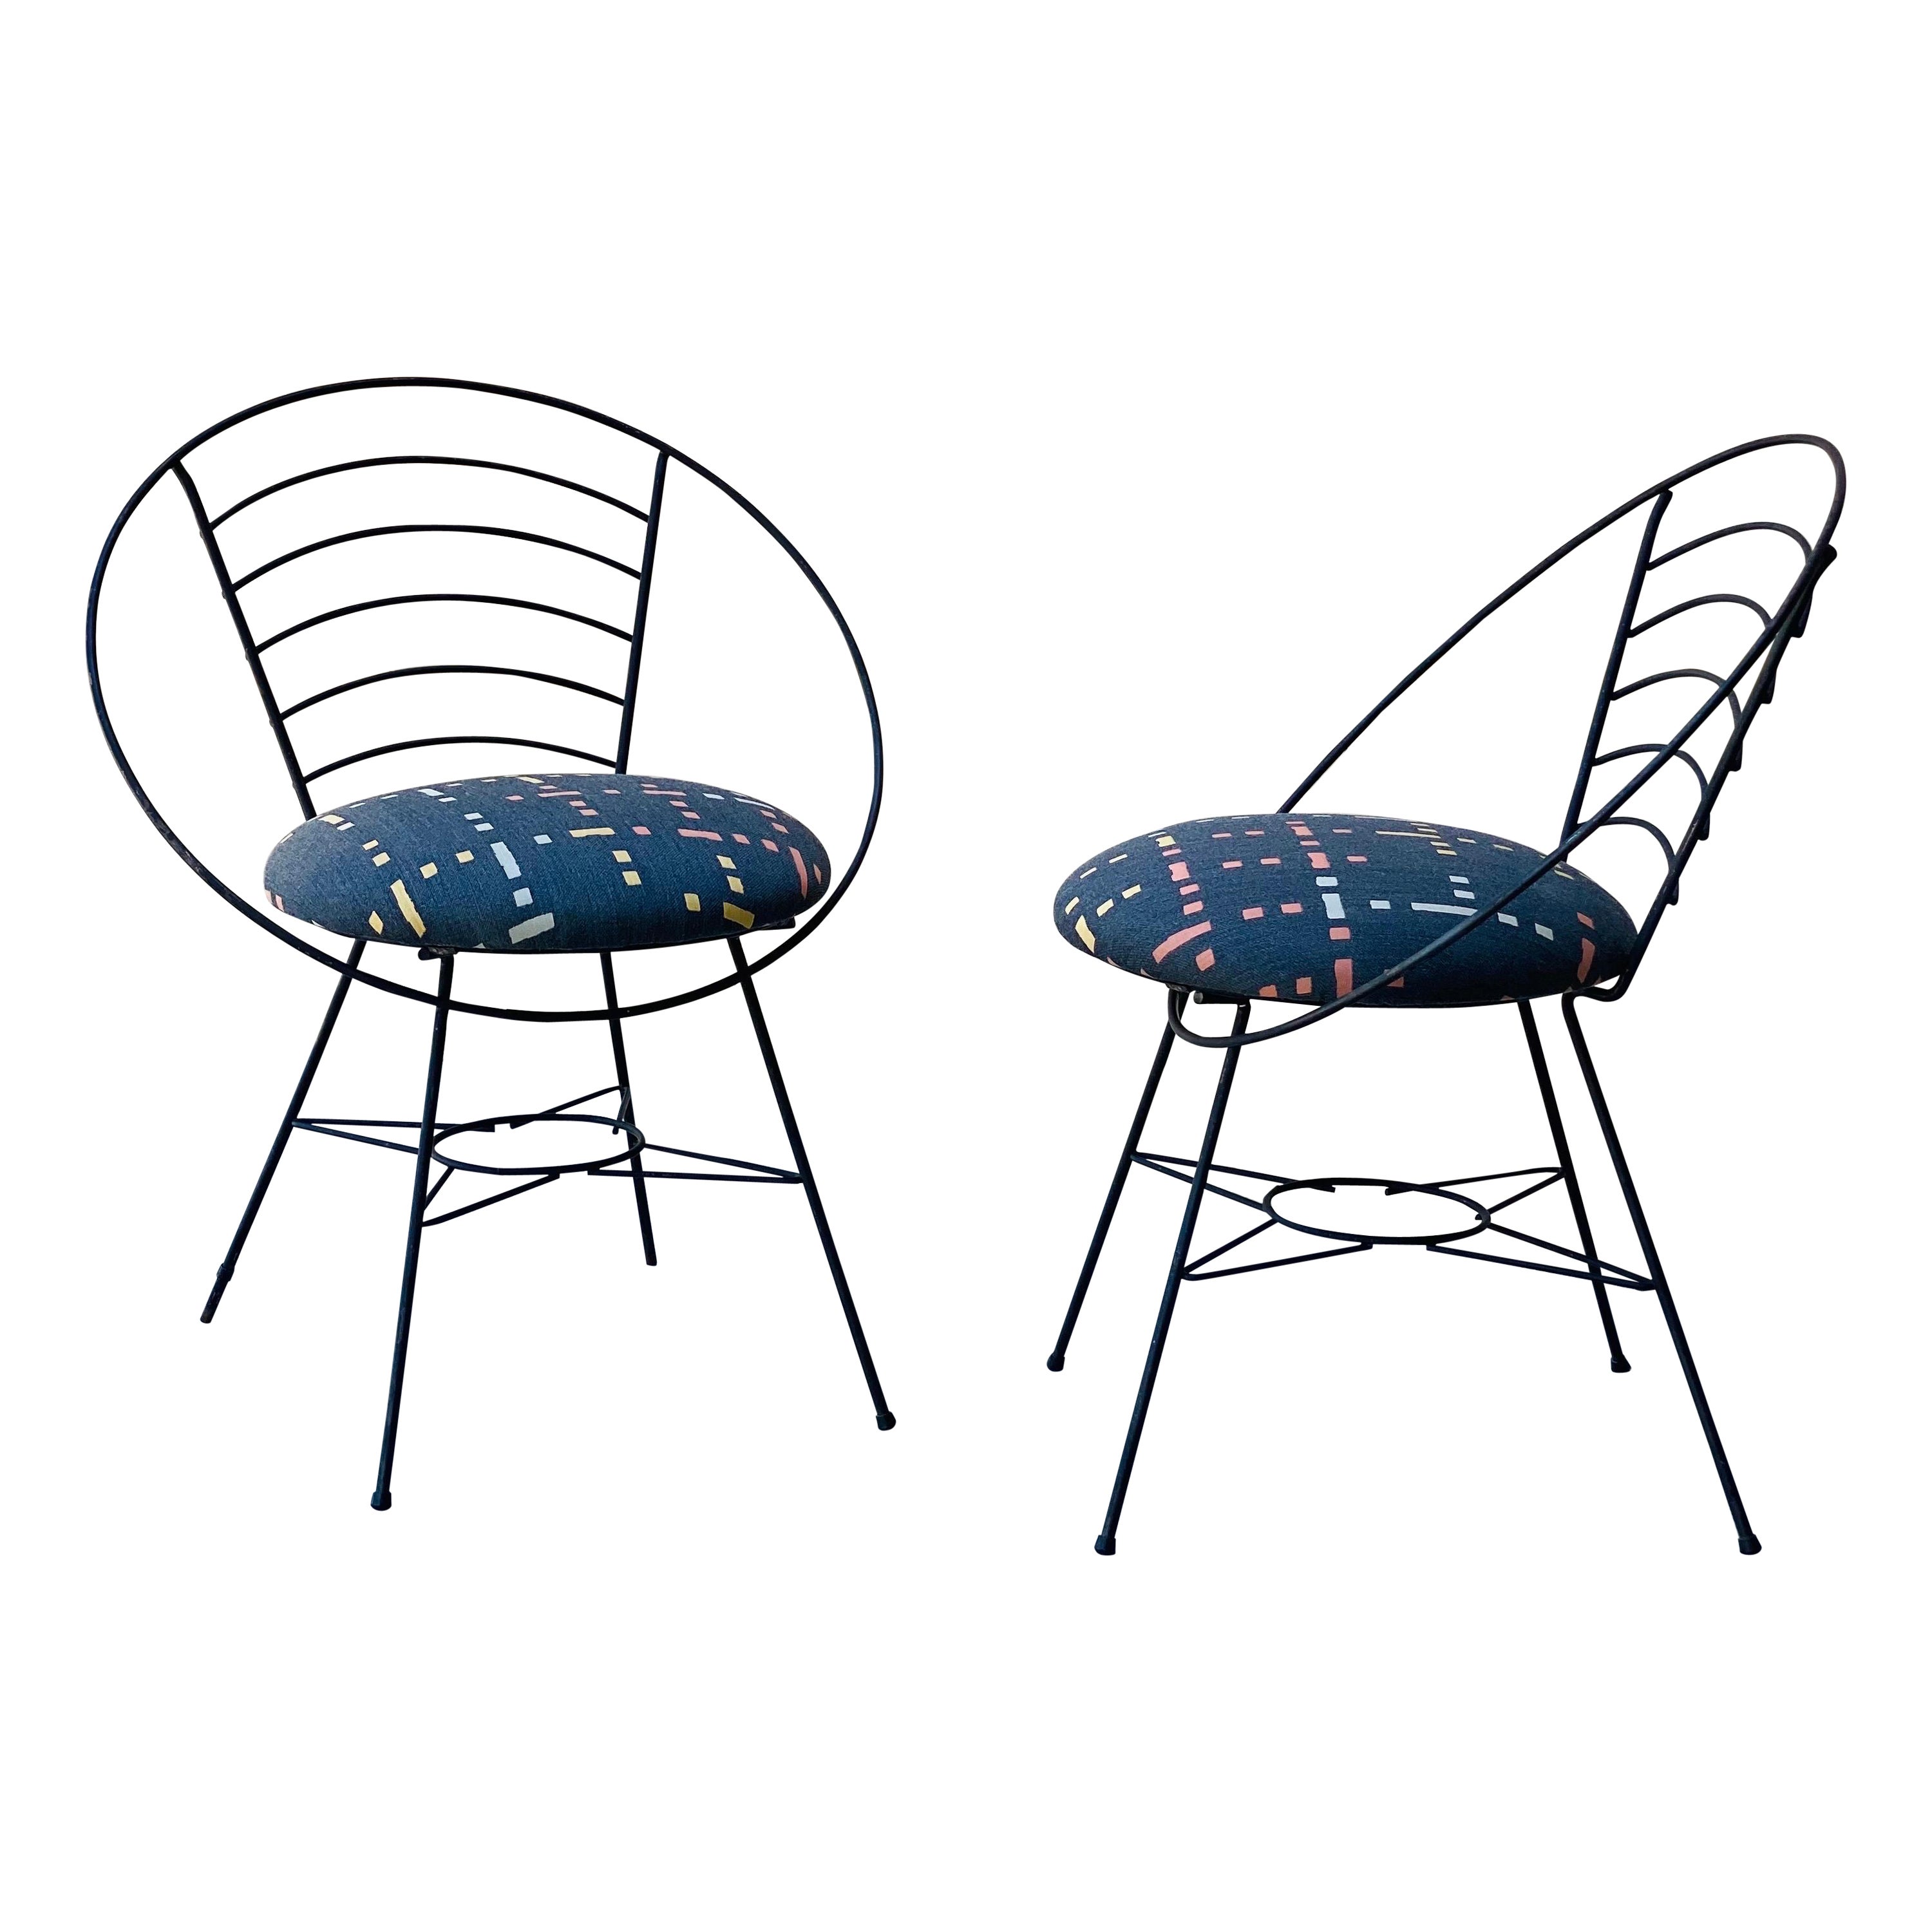 1970s Wrought Black Iron Atomic Hoop Chairs, a Pair